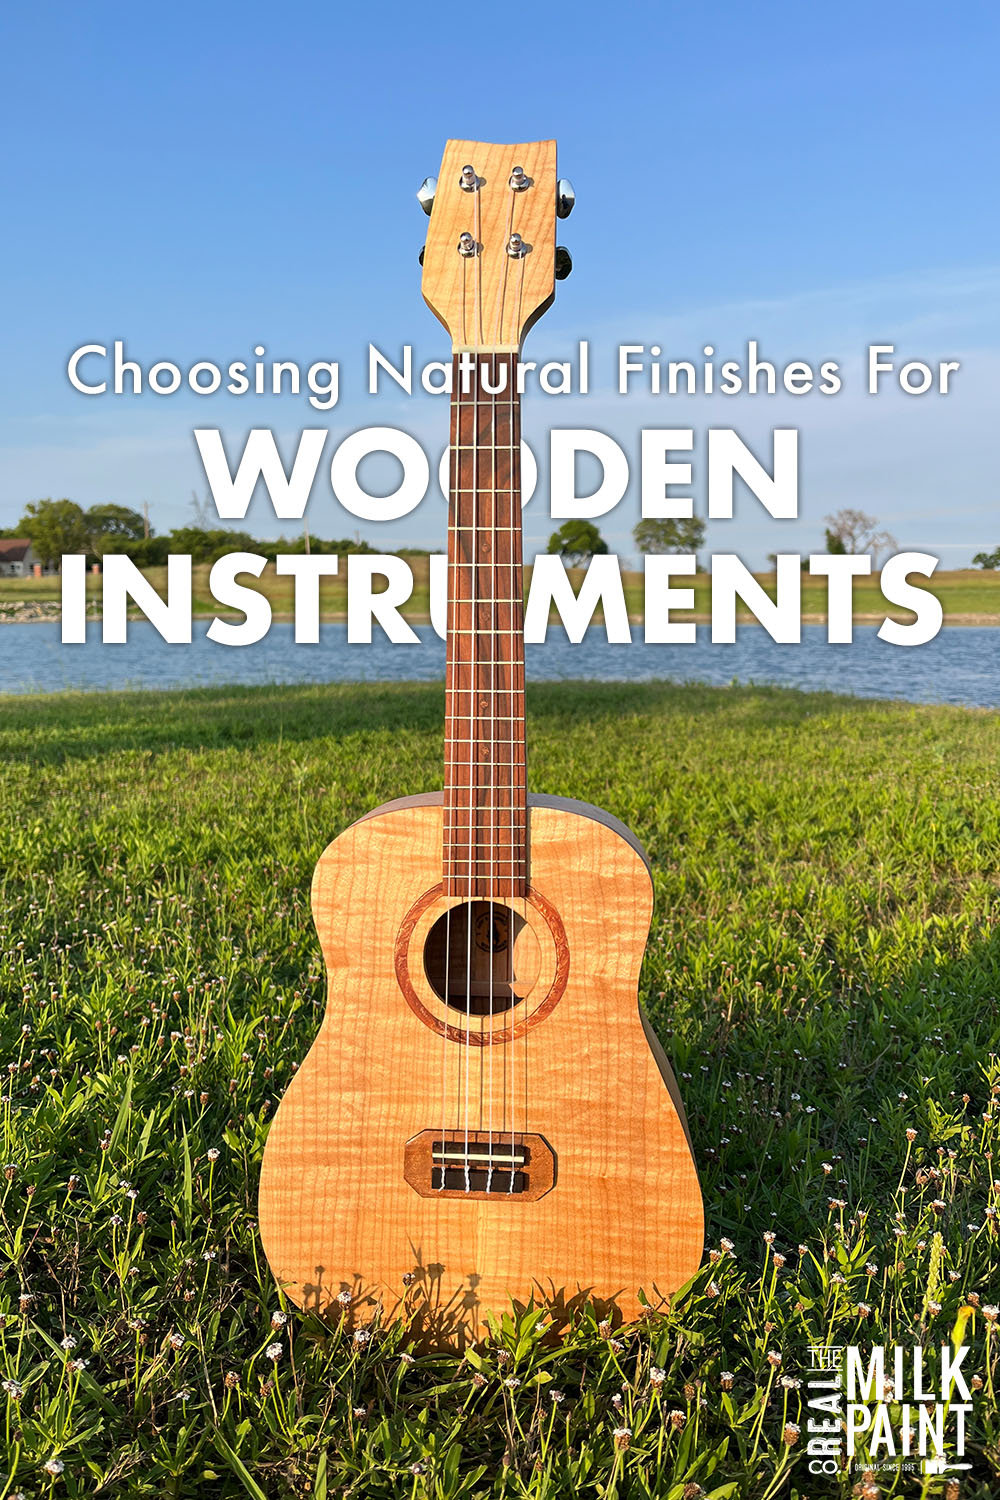 How to Choose Natural Finishes for Wooden Instruments